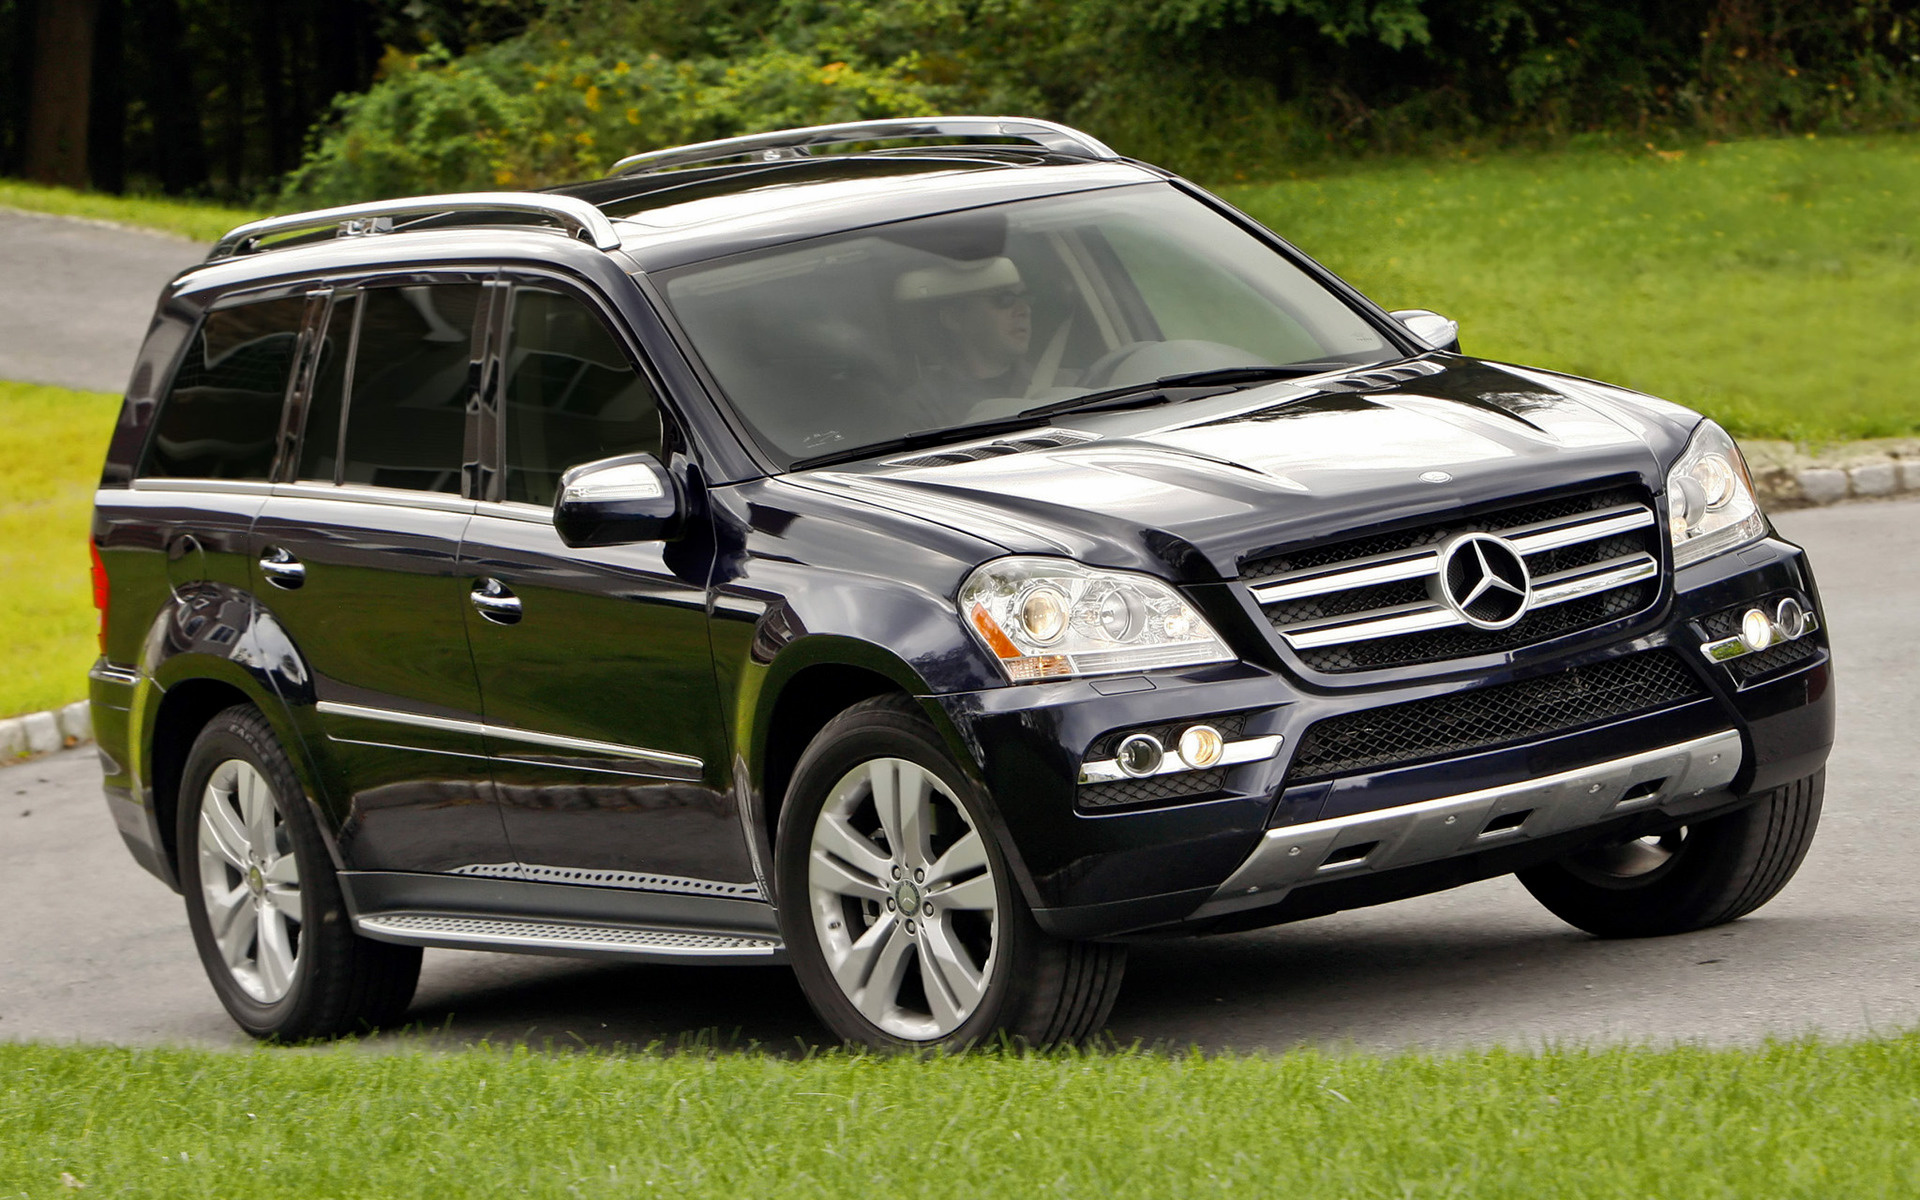 2010 Mercedes-Benz GL-Class (US) - Wallpapers and HD Images | Car Pixel